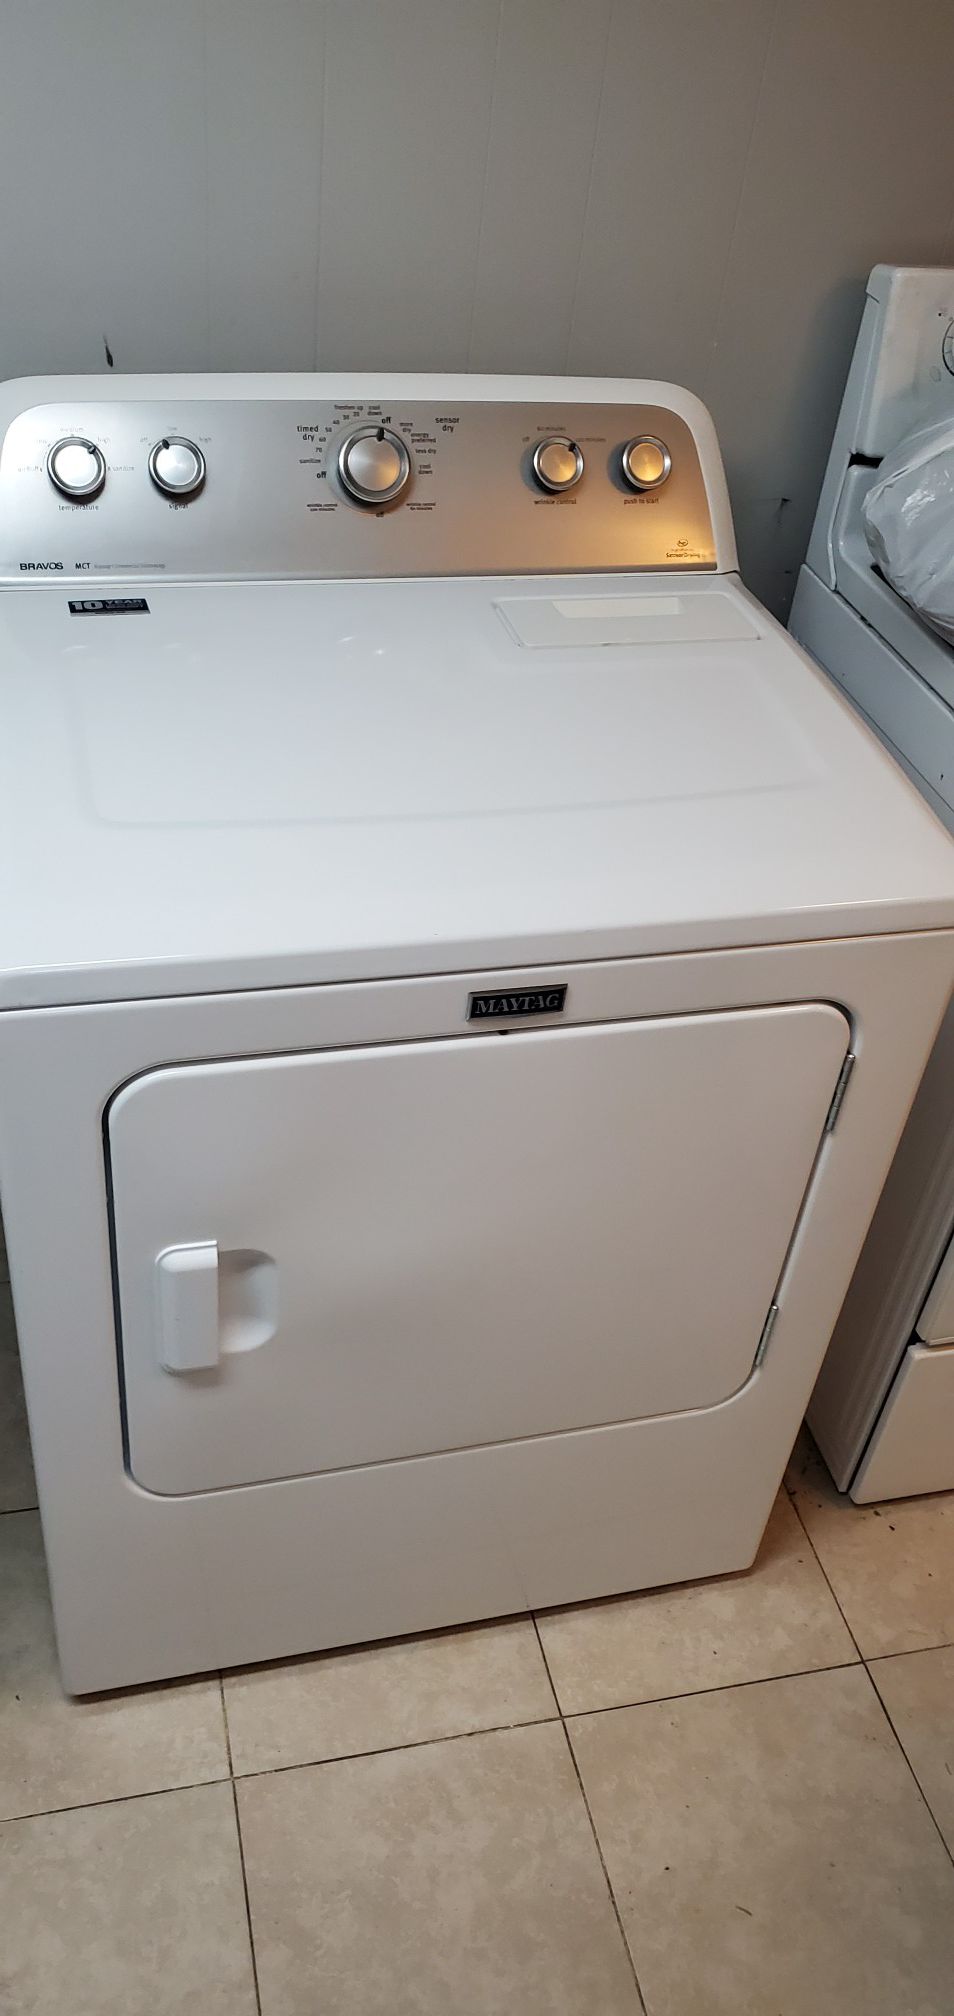 Maytag dryer good working conditions